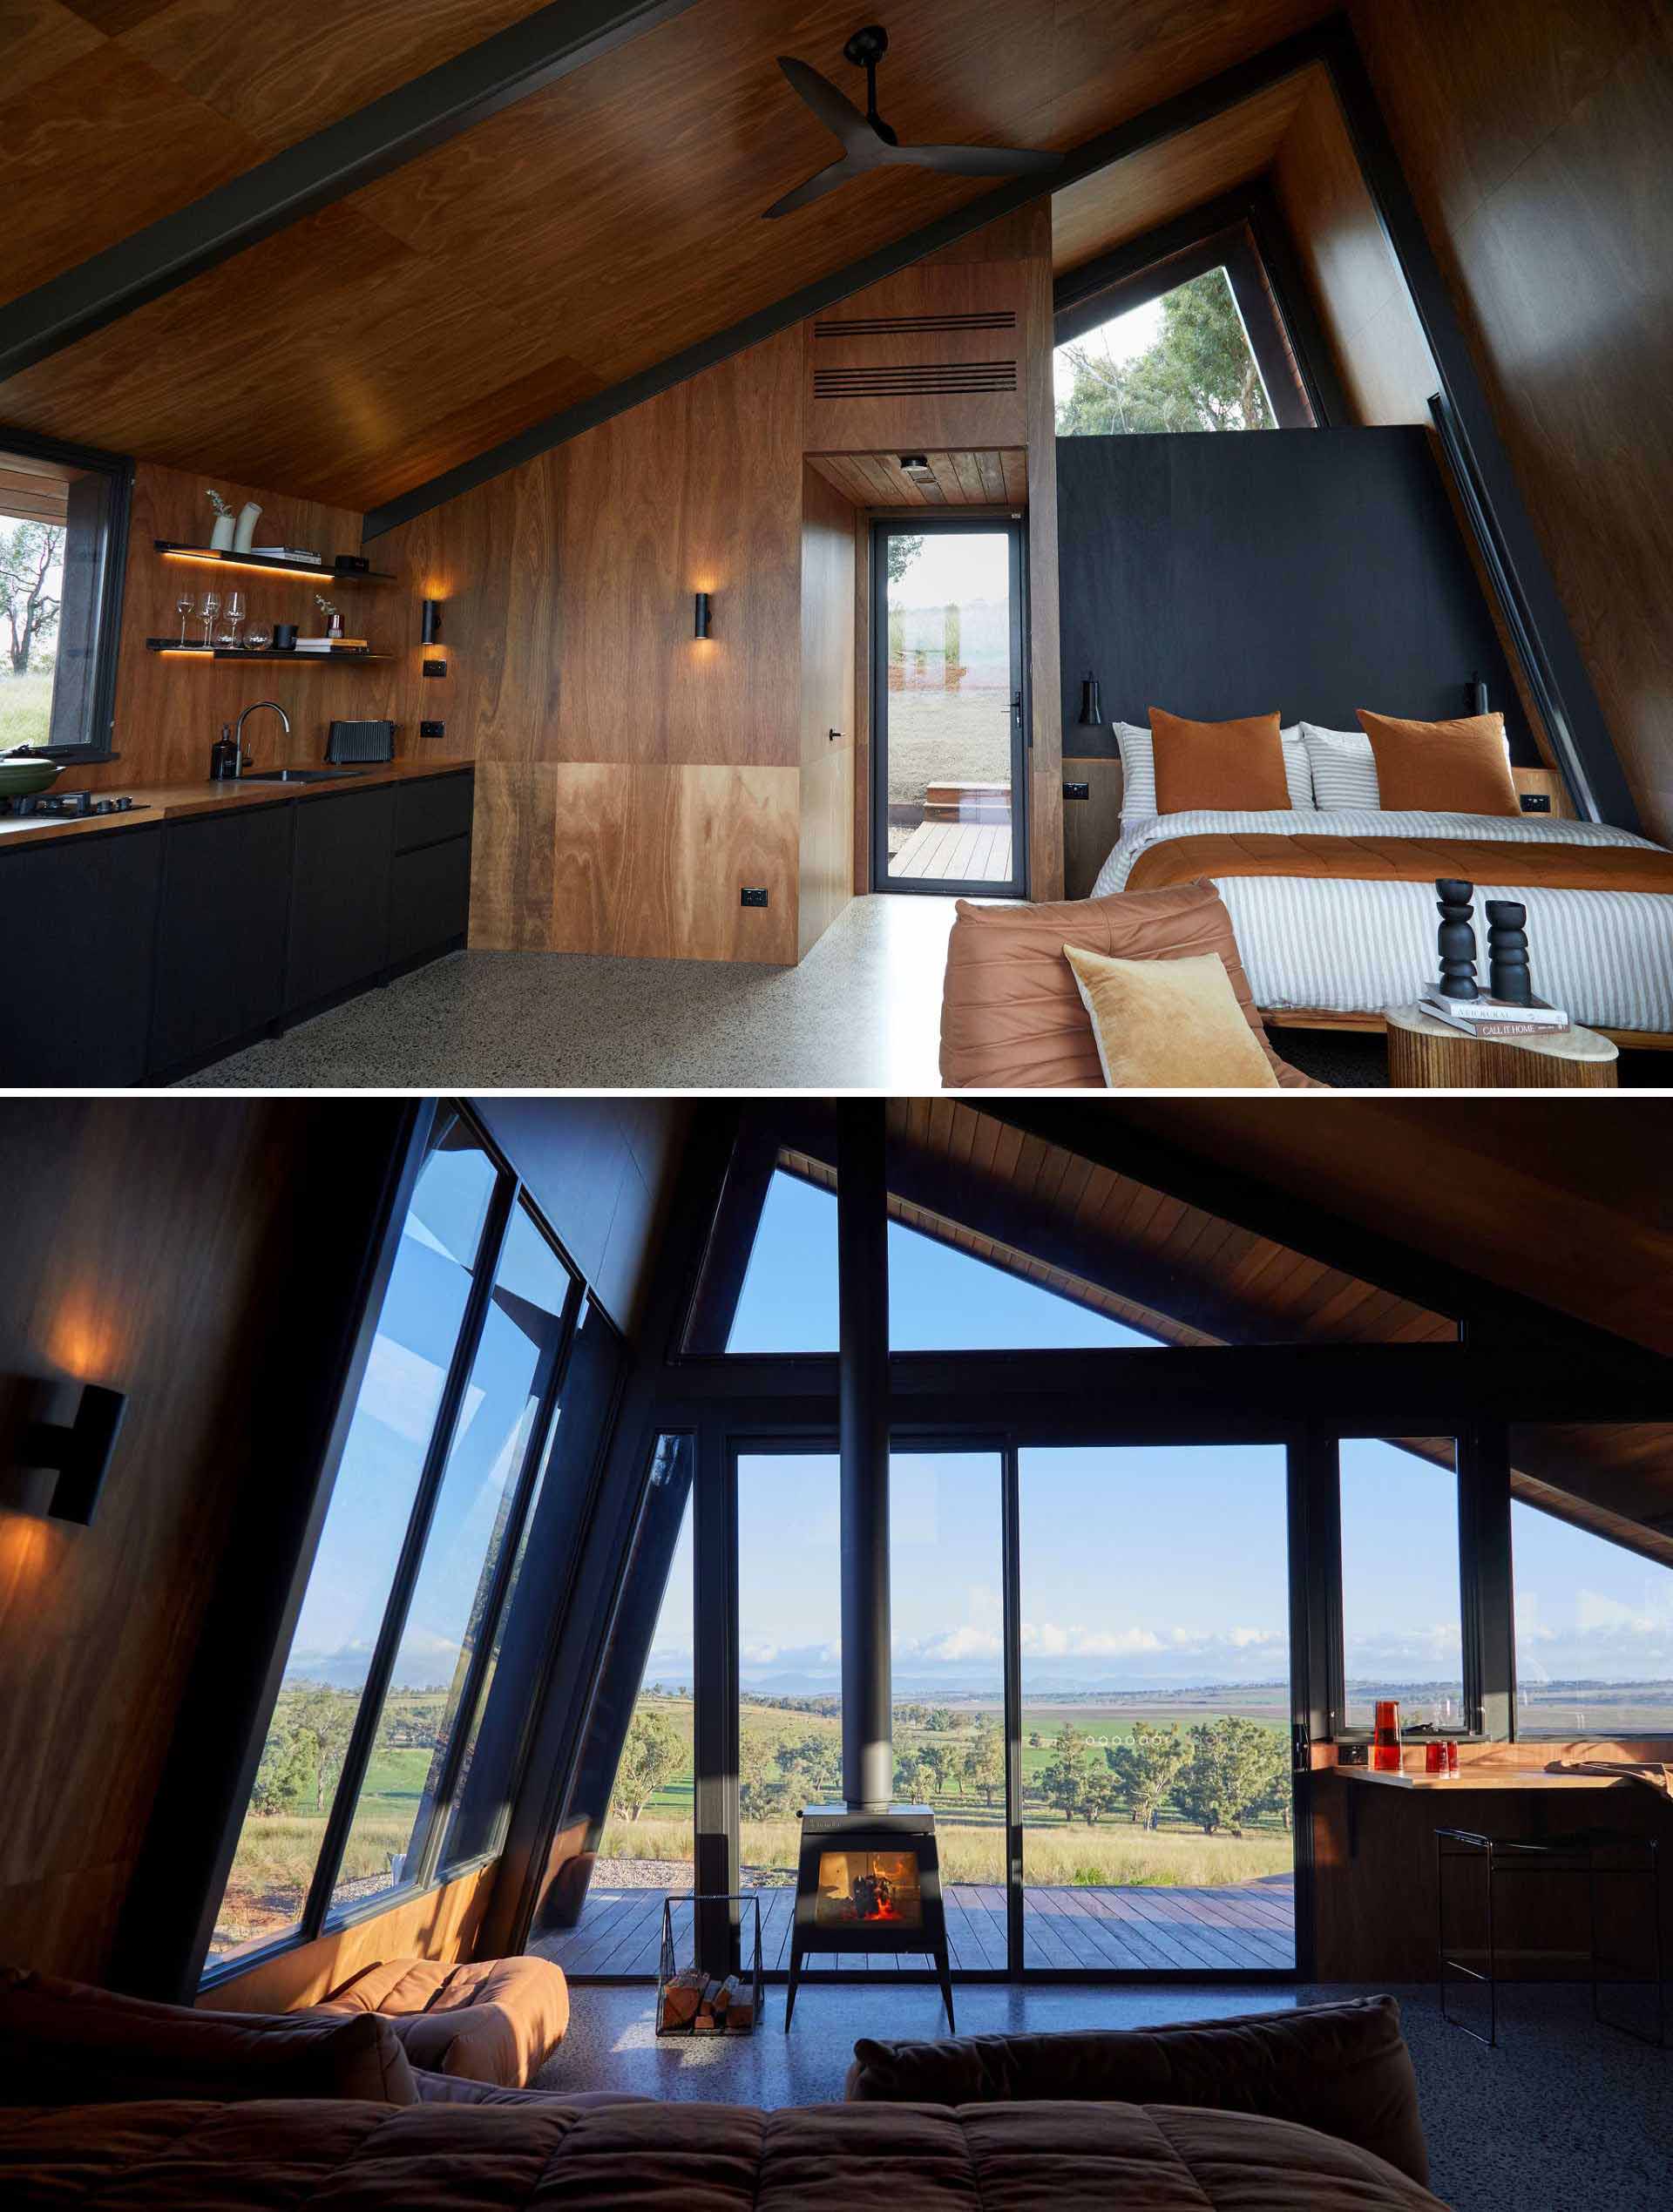 The interior of this small modern cabin is largely open-plan, with a sleeping space within the main living area.